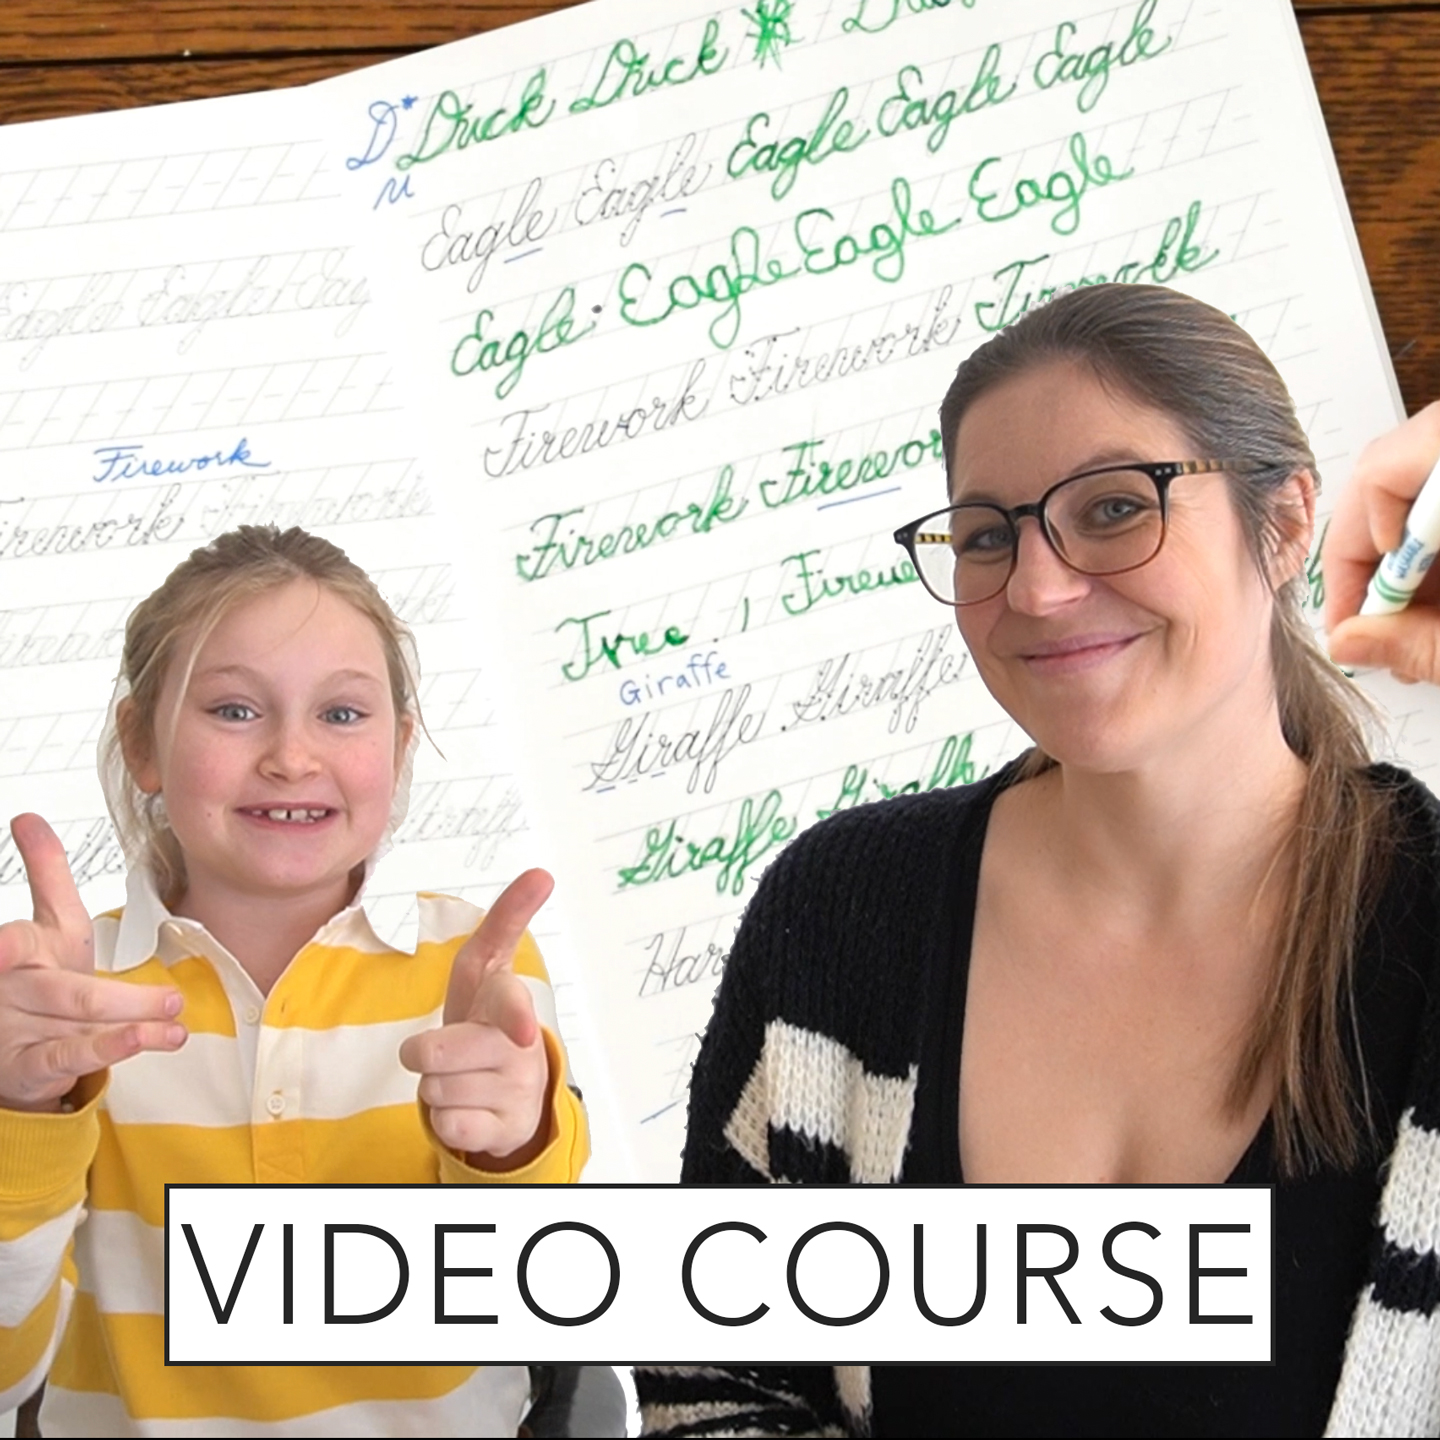 Enjoy TPK's free Learn Cursive for Kids (and Adults!) Video Course